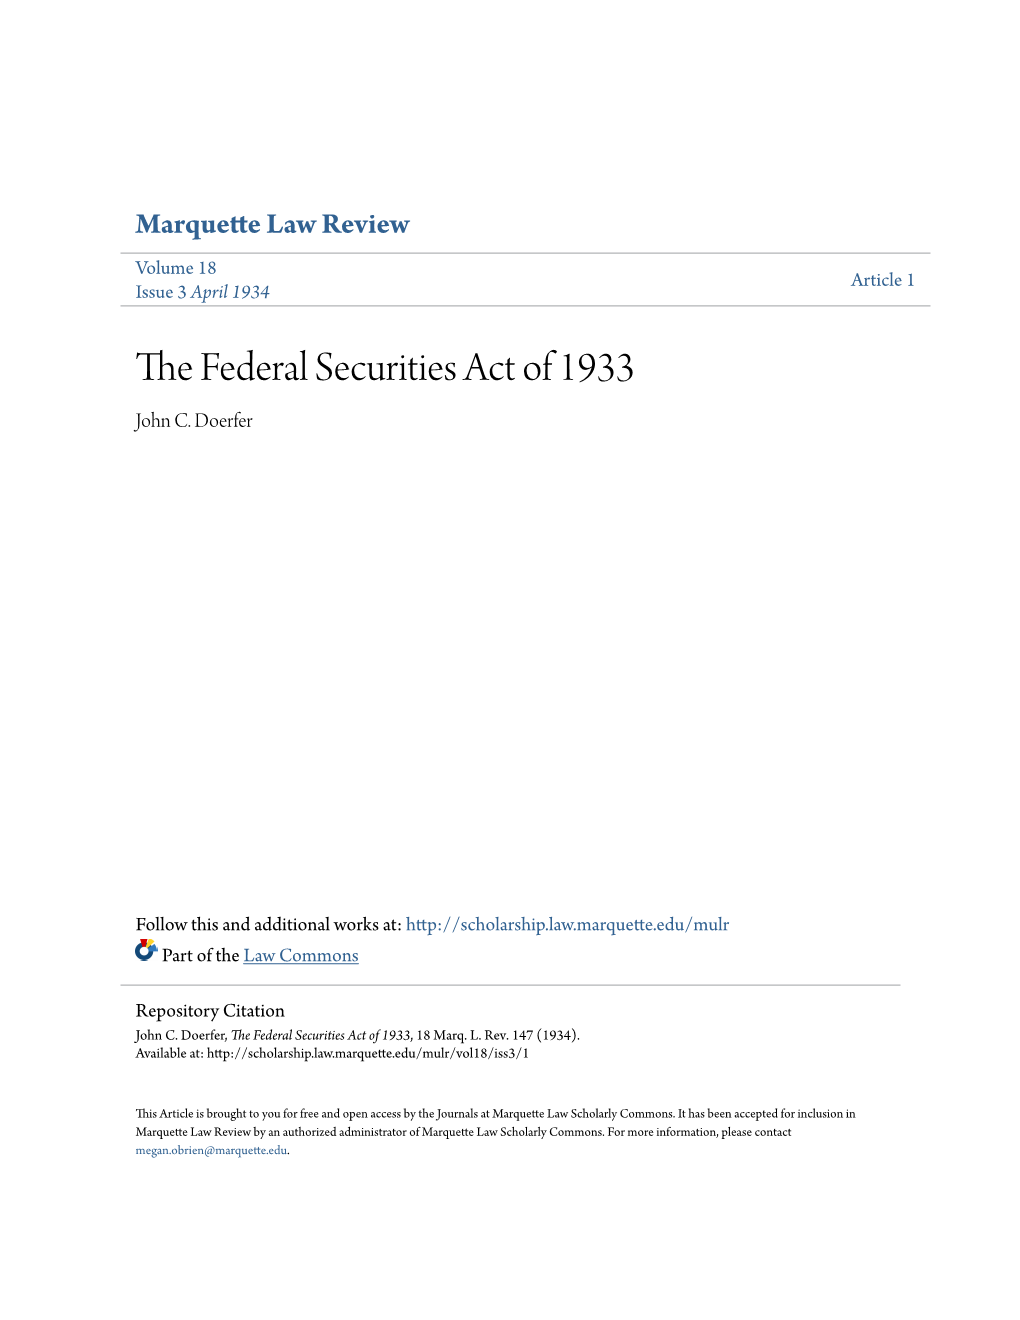 The Federal Securities Act of 1933, 18 Marq